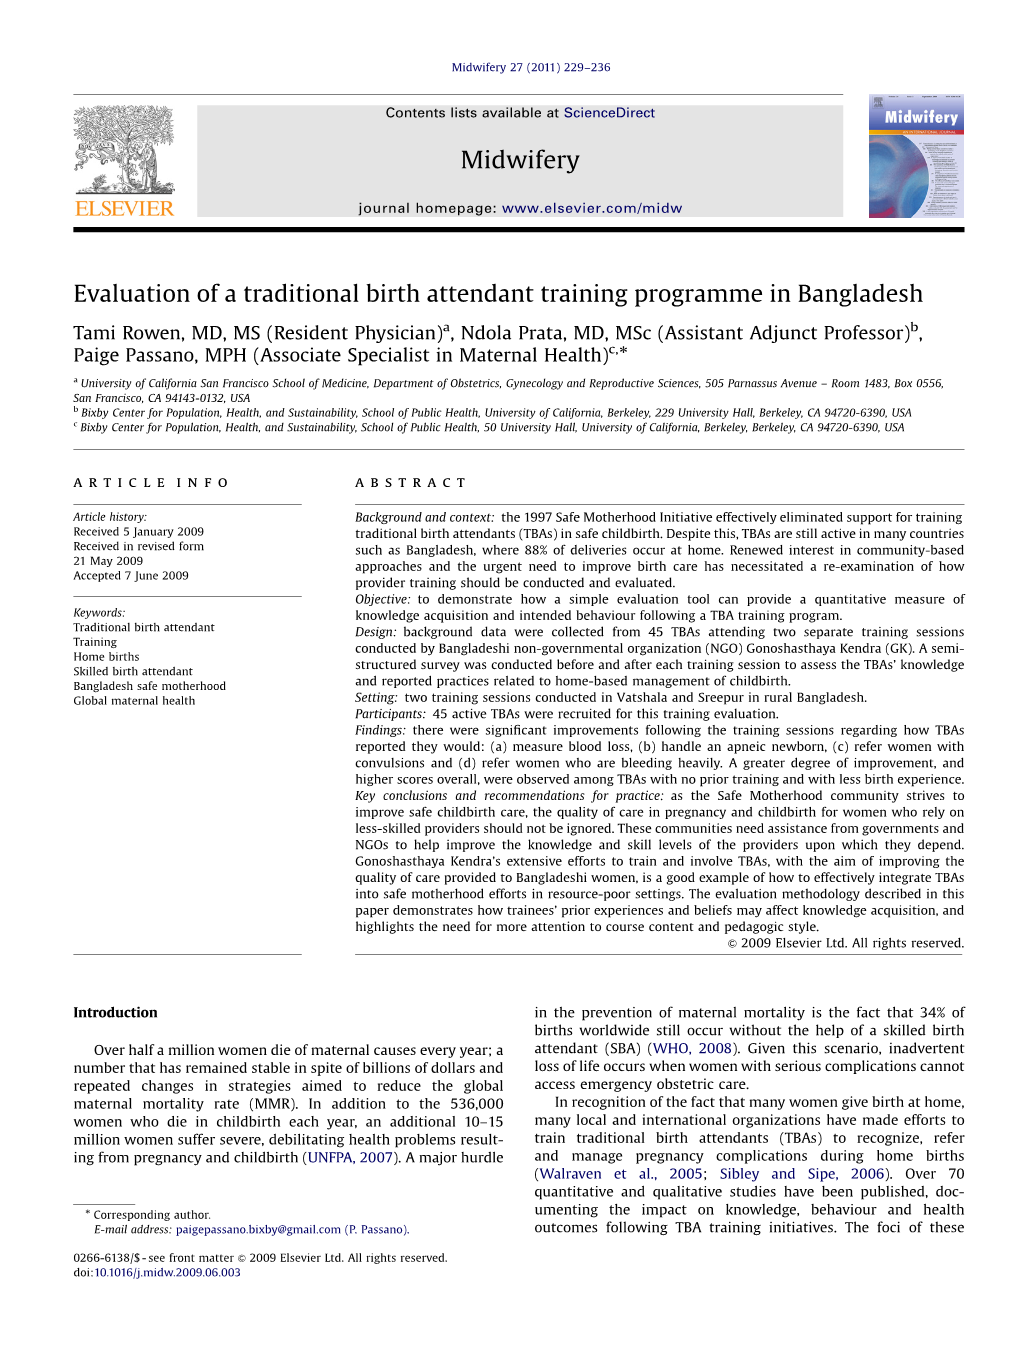 Evaluation of a Traditional Birth Attendant Training Programme in Bangladesh